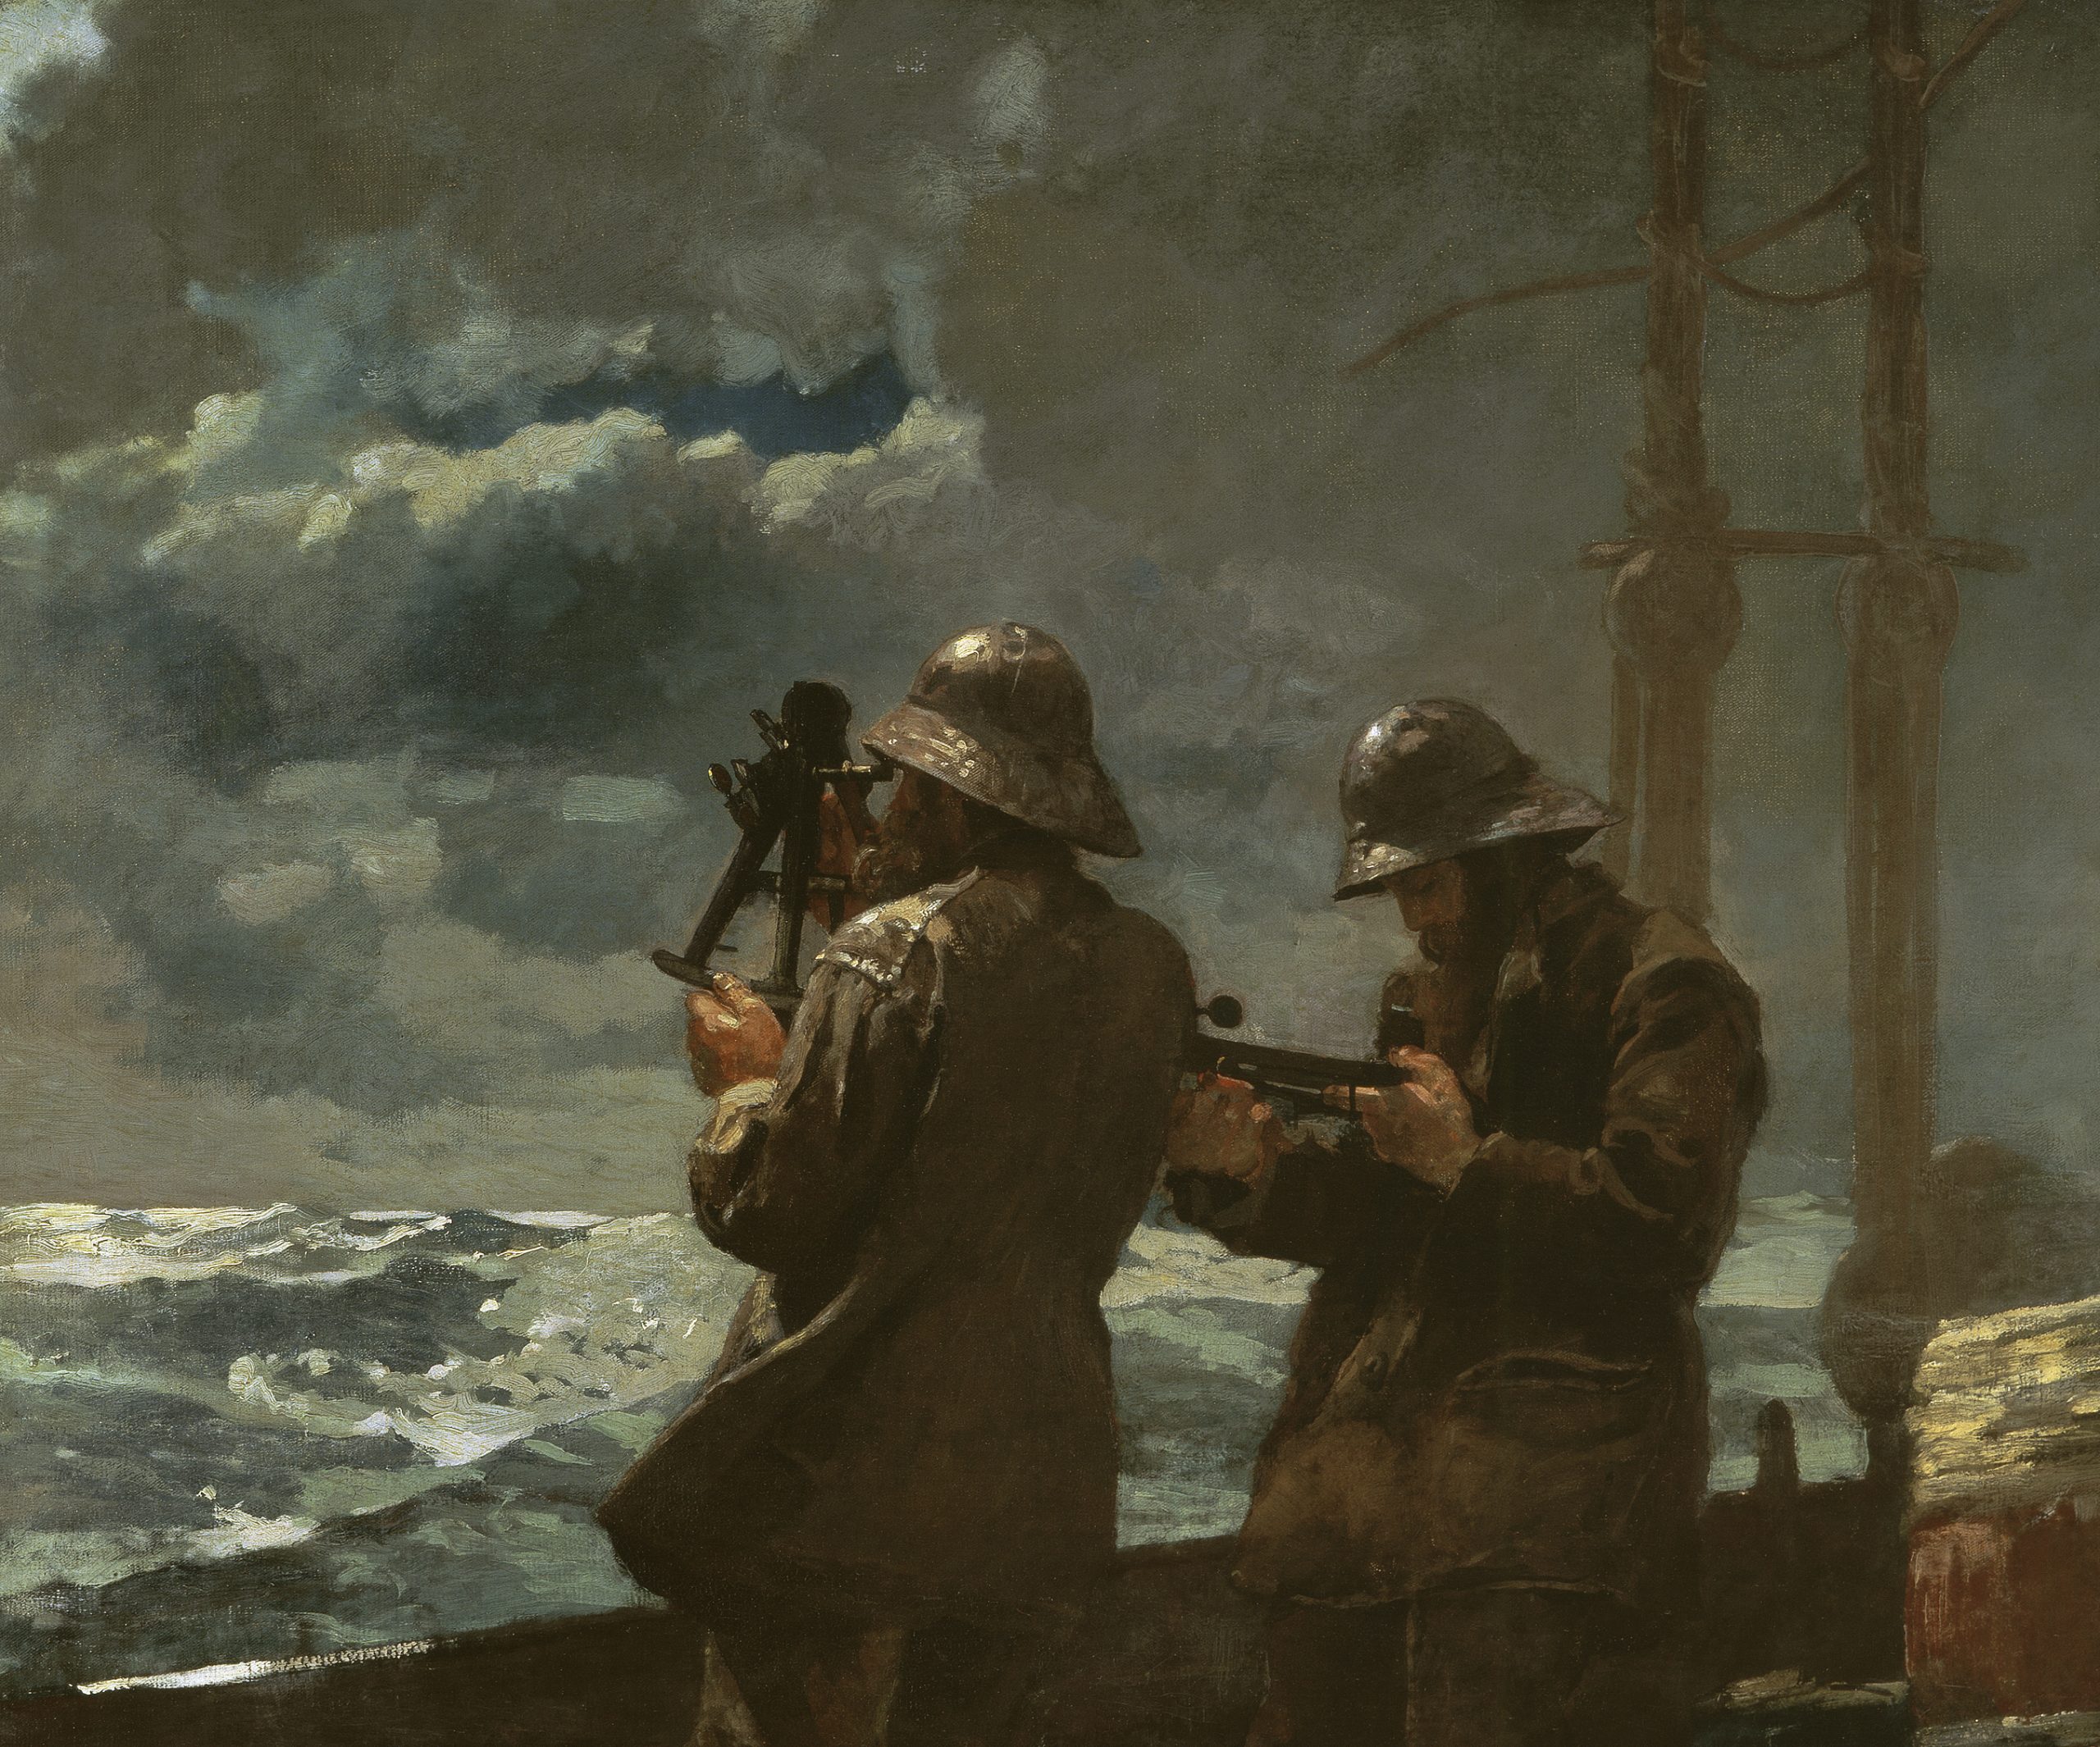 Winslow Homer Eight Bells, 1886, Oil on canvas, 64 x 76.7 cm, Addison Gallery of American Art, Phillips Academy, Andover, Massachusetts			
Gift of anonymous donor, 1930.379			
© Addison Gallery of American Art, Phillips Academy, Andover, Massachusetts